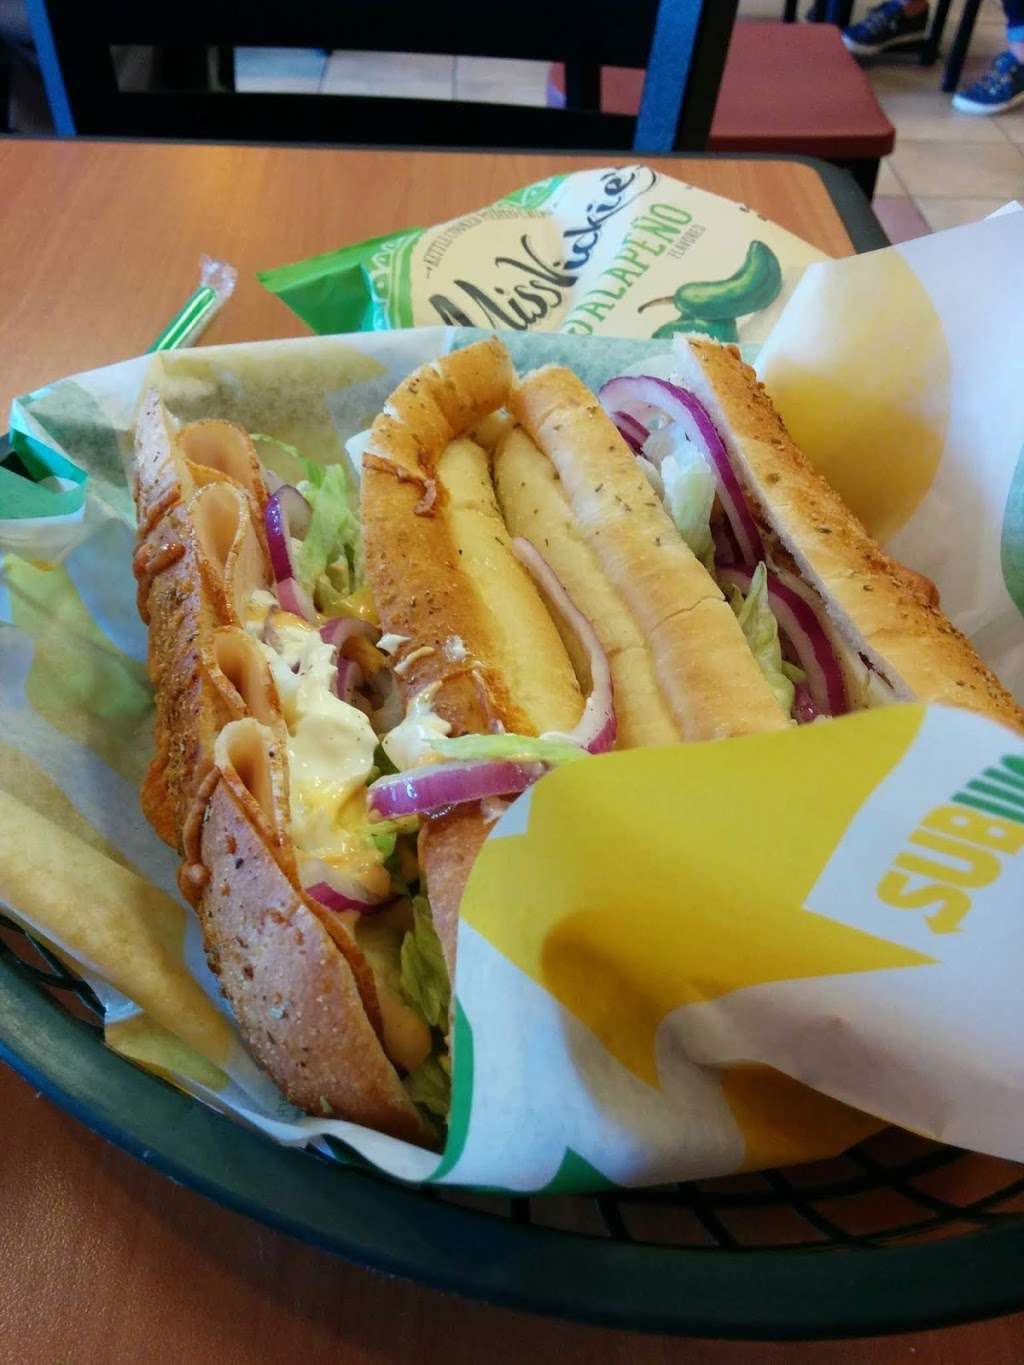 Subway | Weston Shoppes, 4000 W 106th St Suite 130, Carmel, IN 46032 | Phone: (317) 733-7827